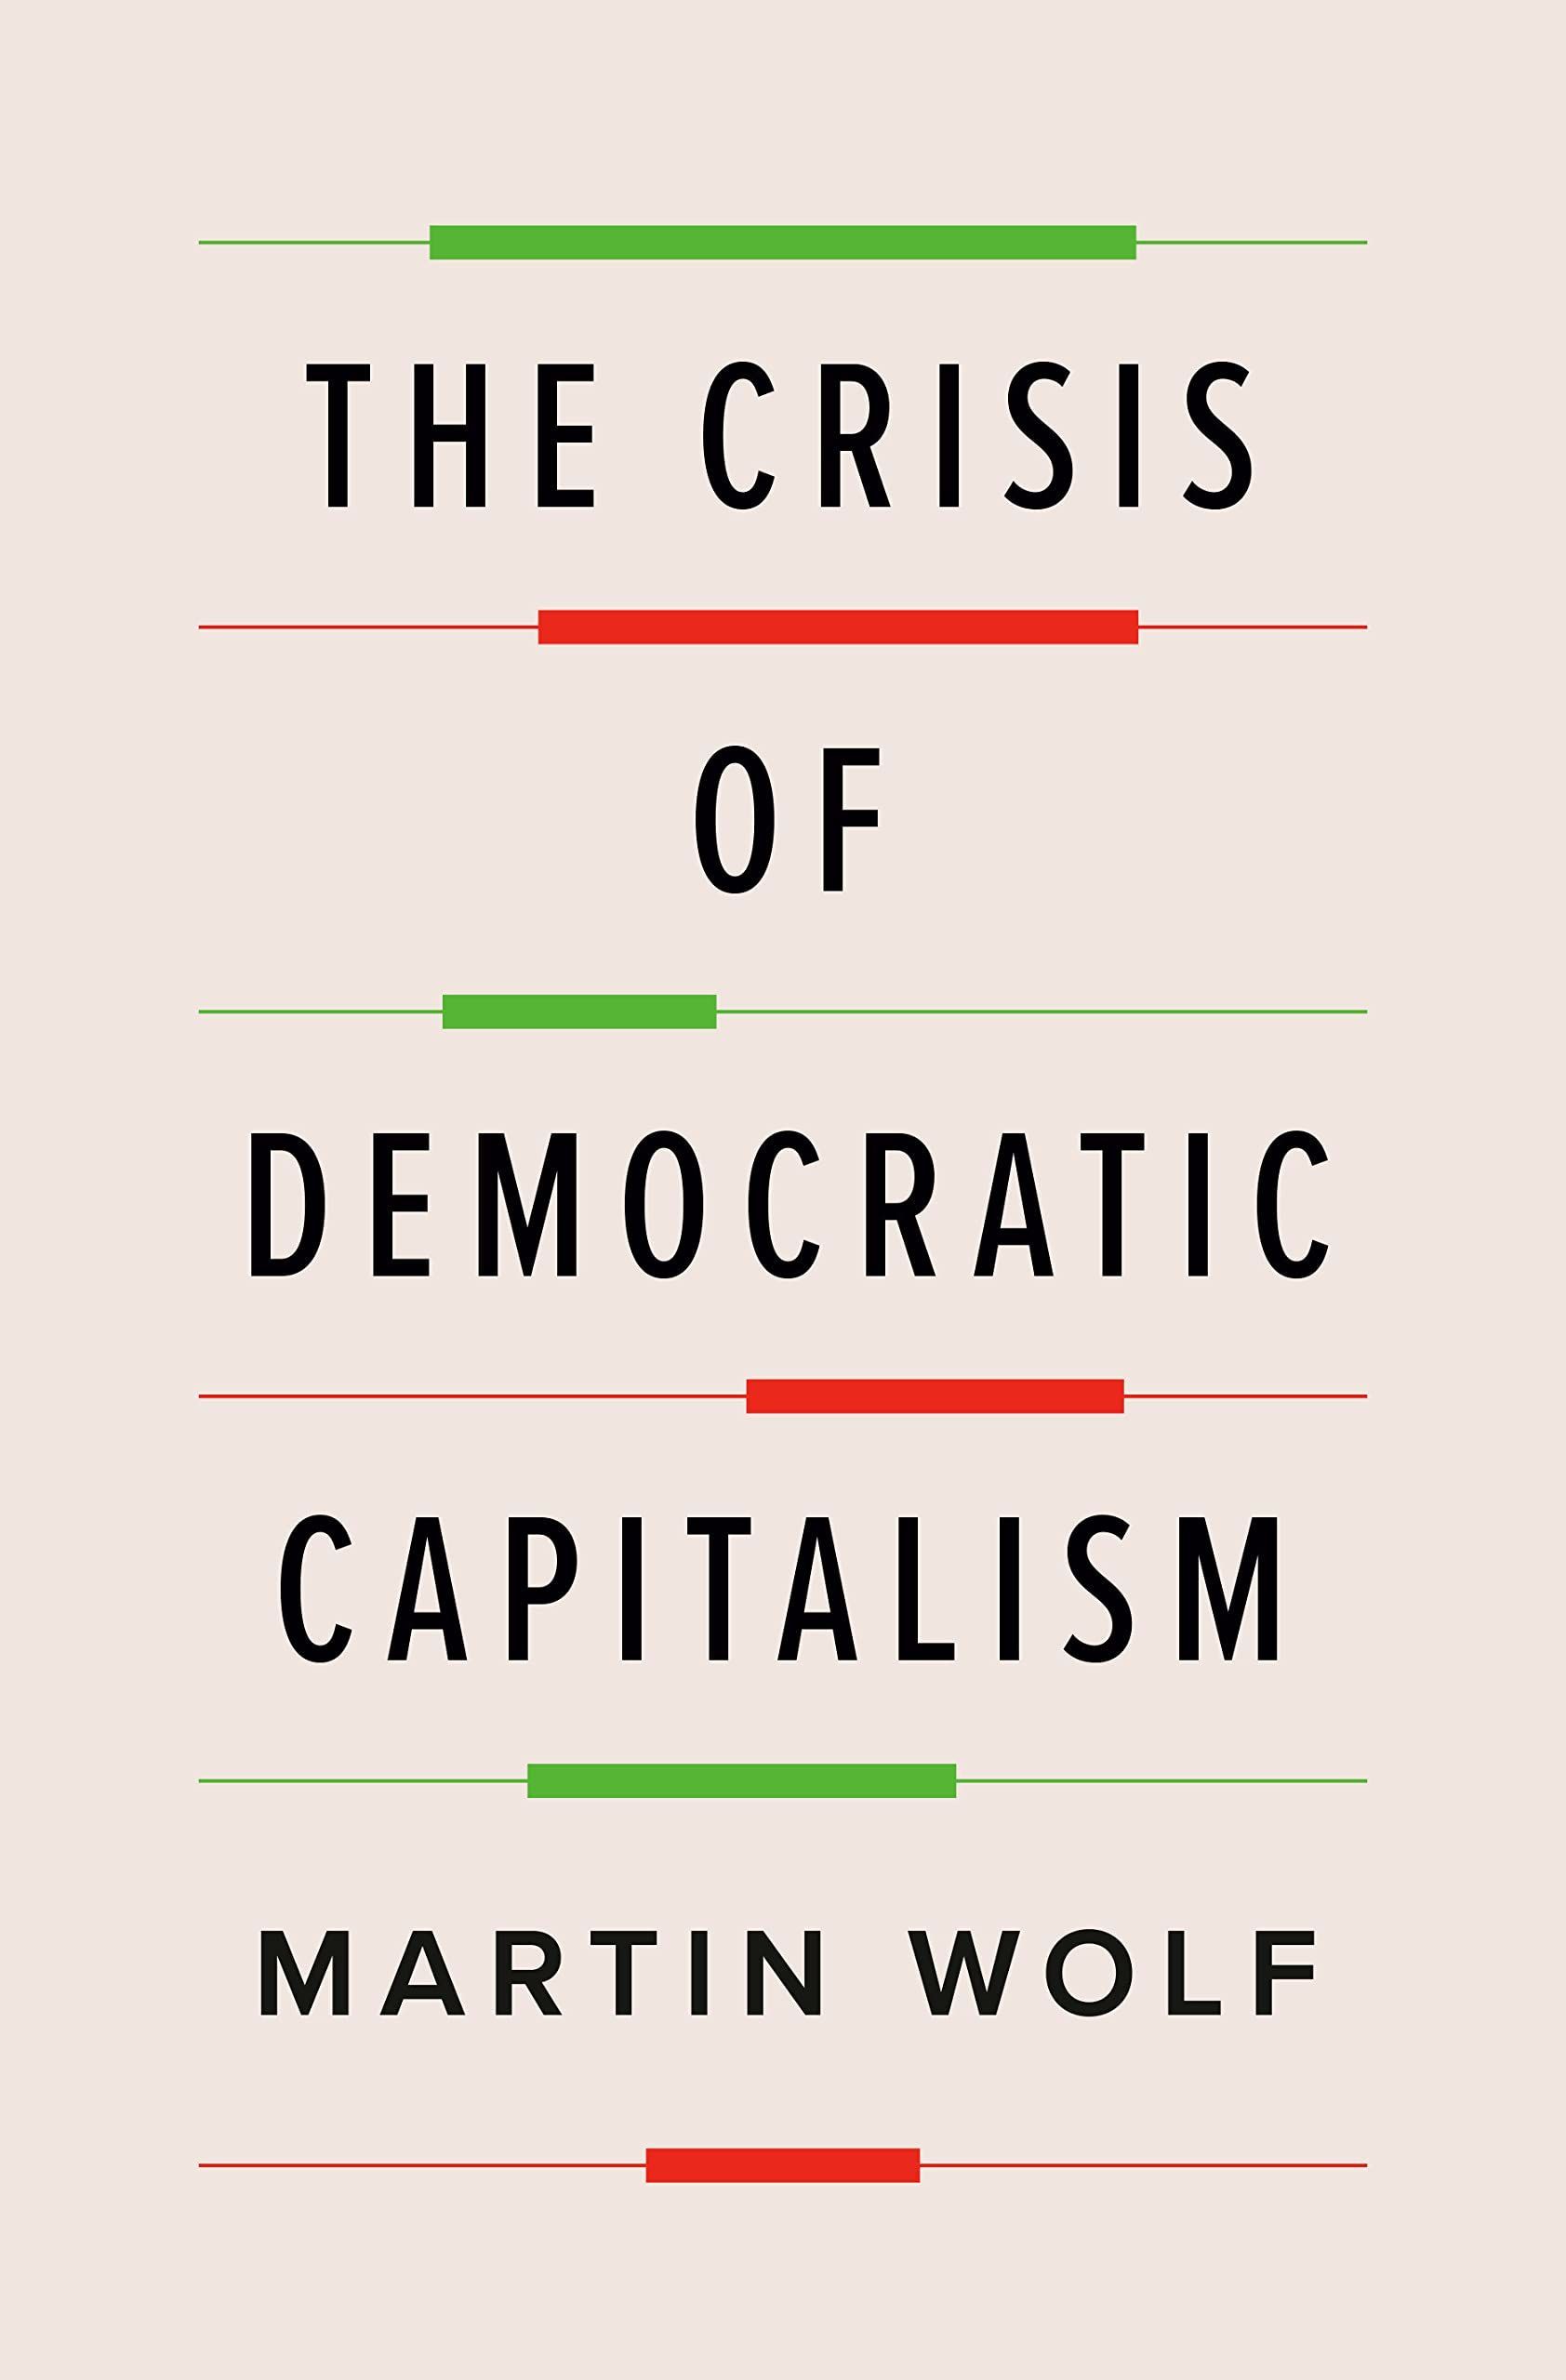 Rigged Capitalism and the Rise of Pluto-populism: On Martin Wolf’s “The Crisis of Democratic Capitalism”